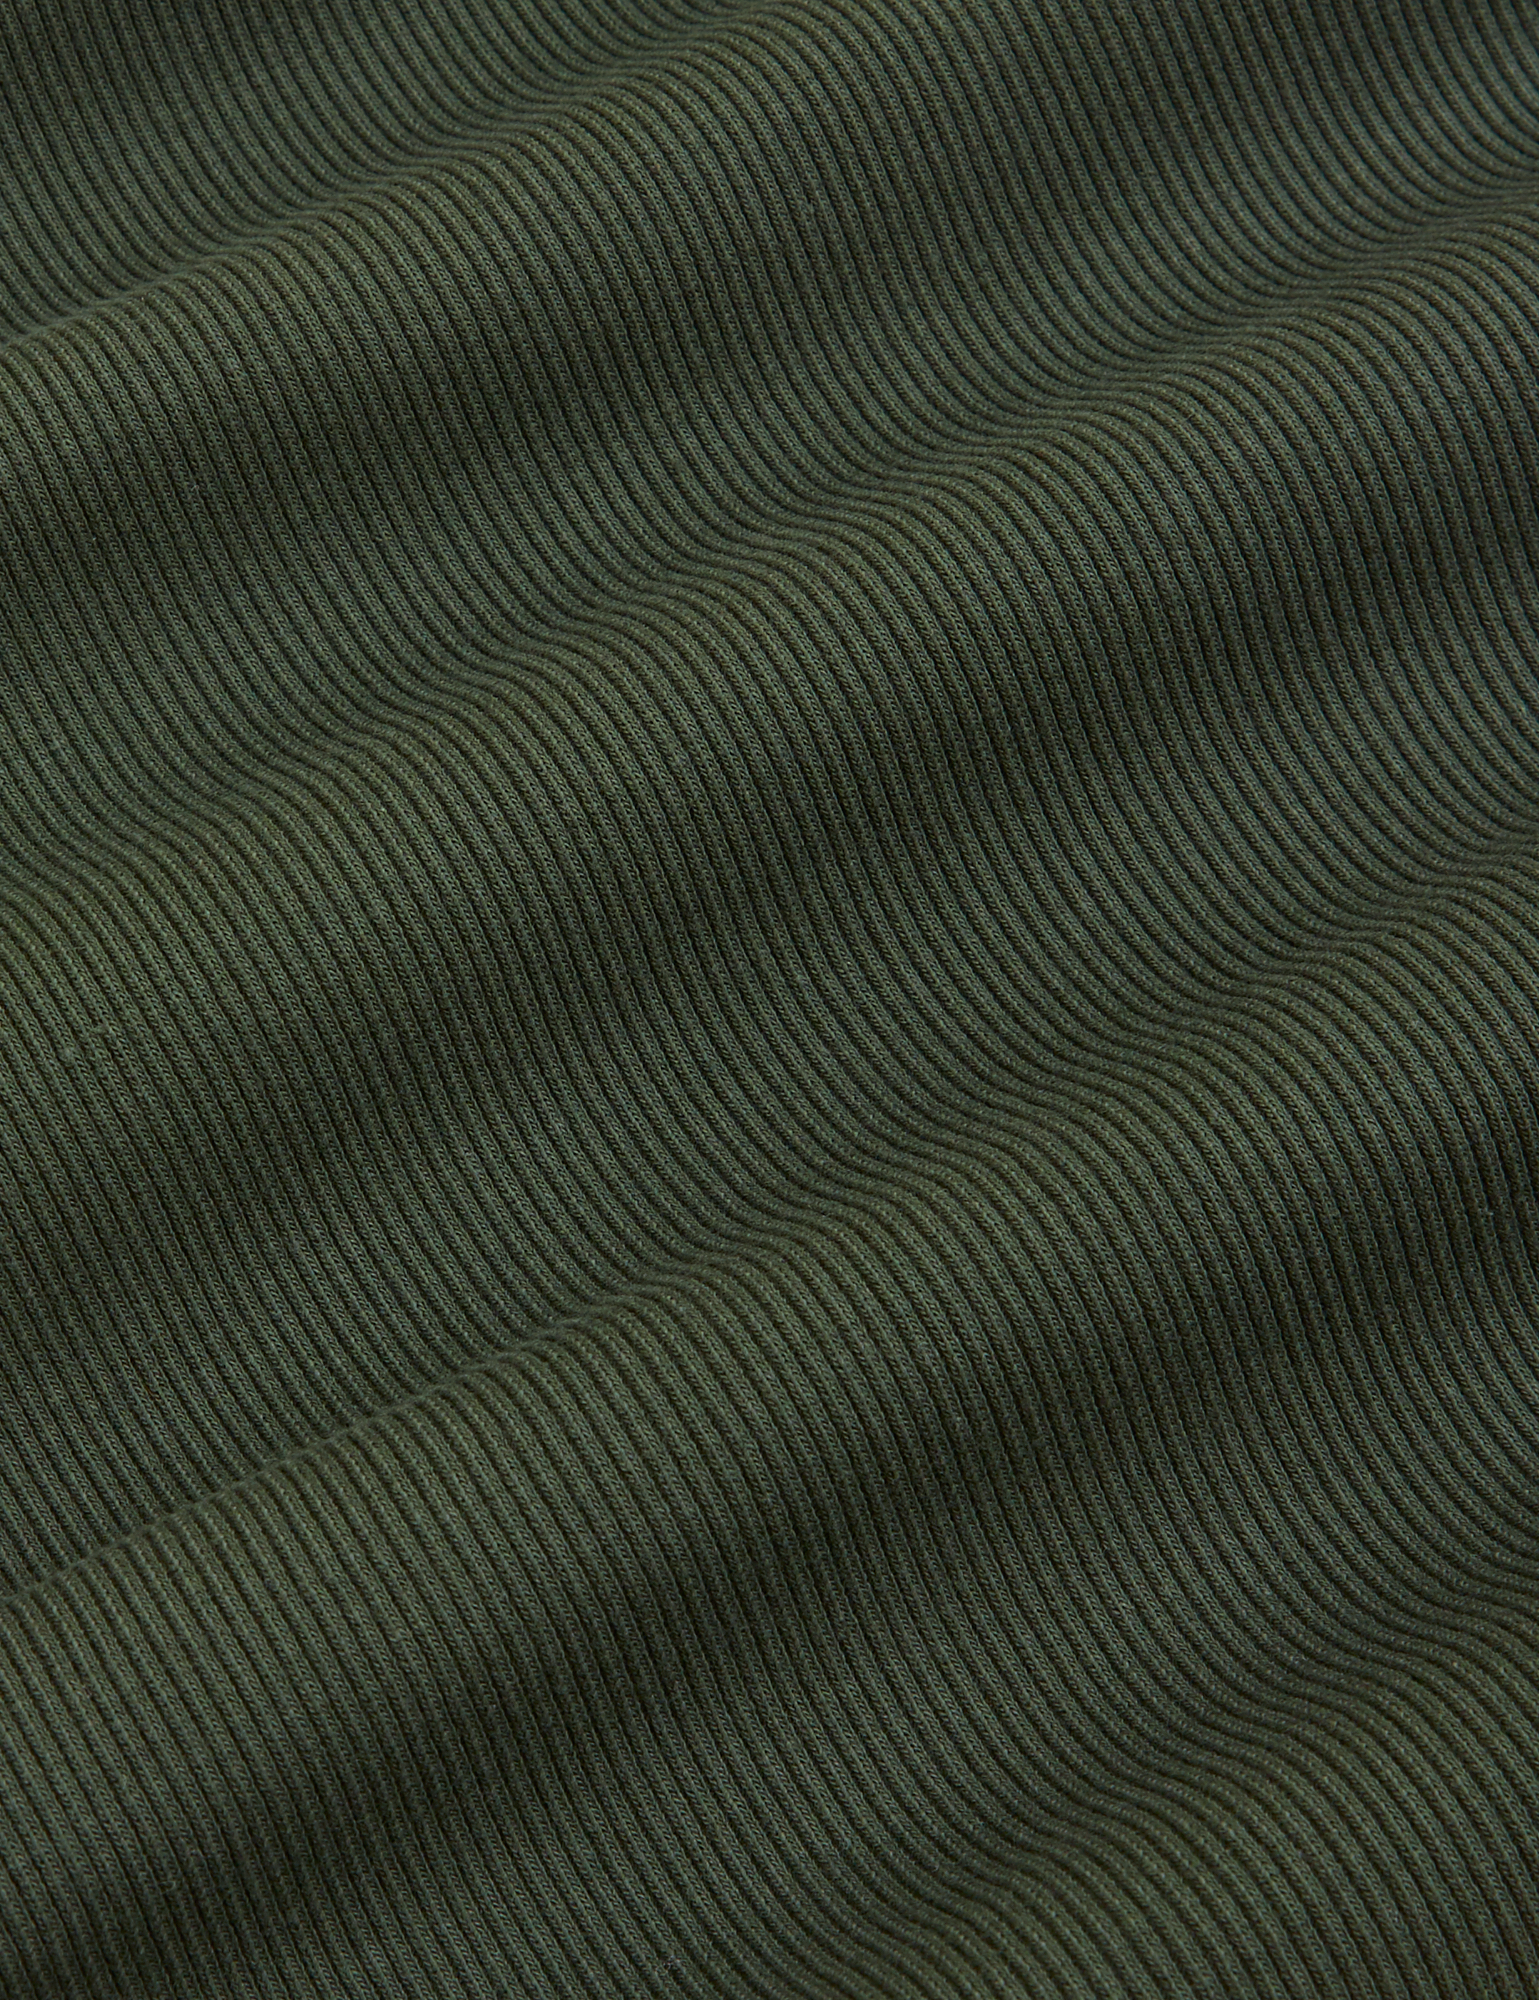 Sleeveless Essential Turtleneck in Swamp Green fabric detail close up